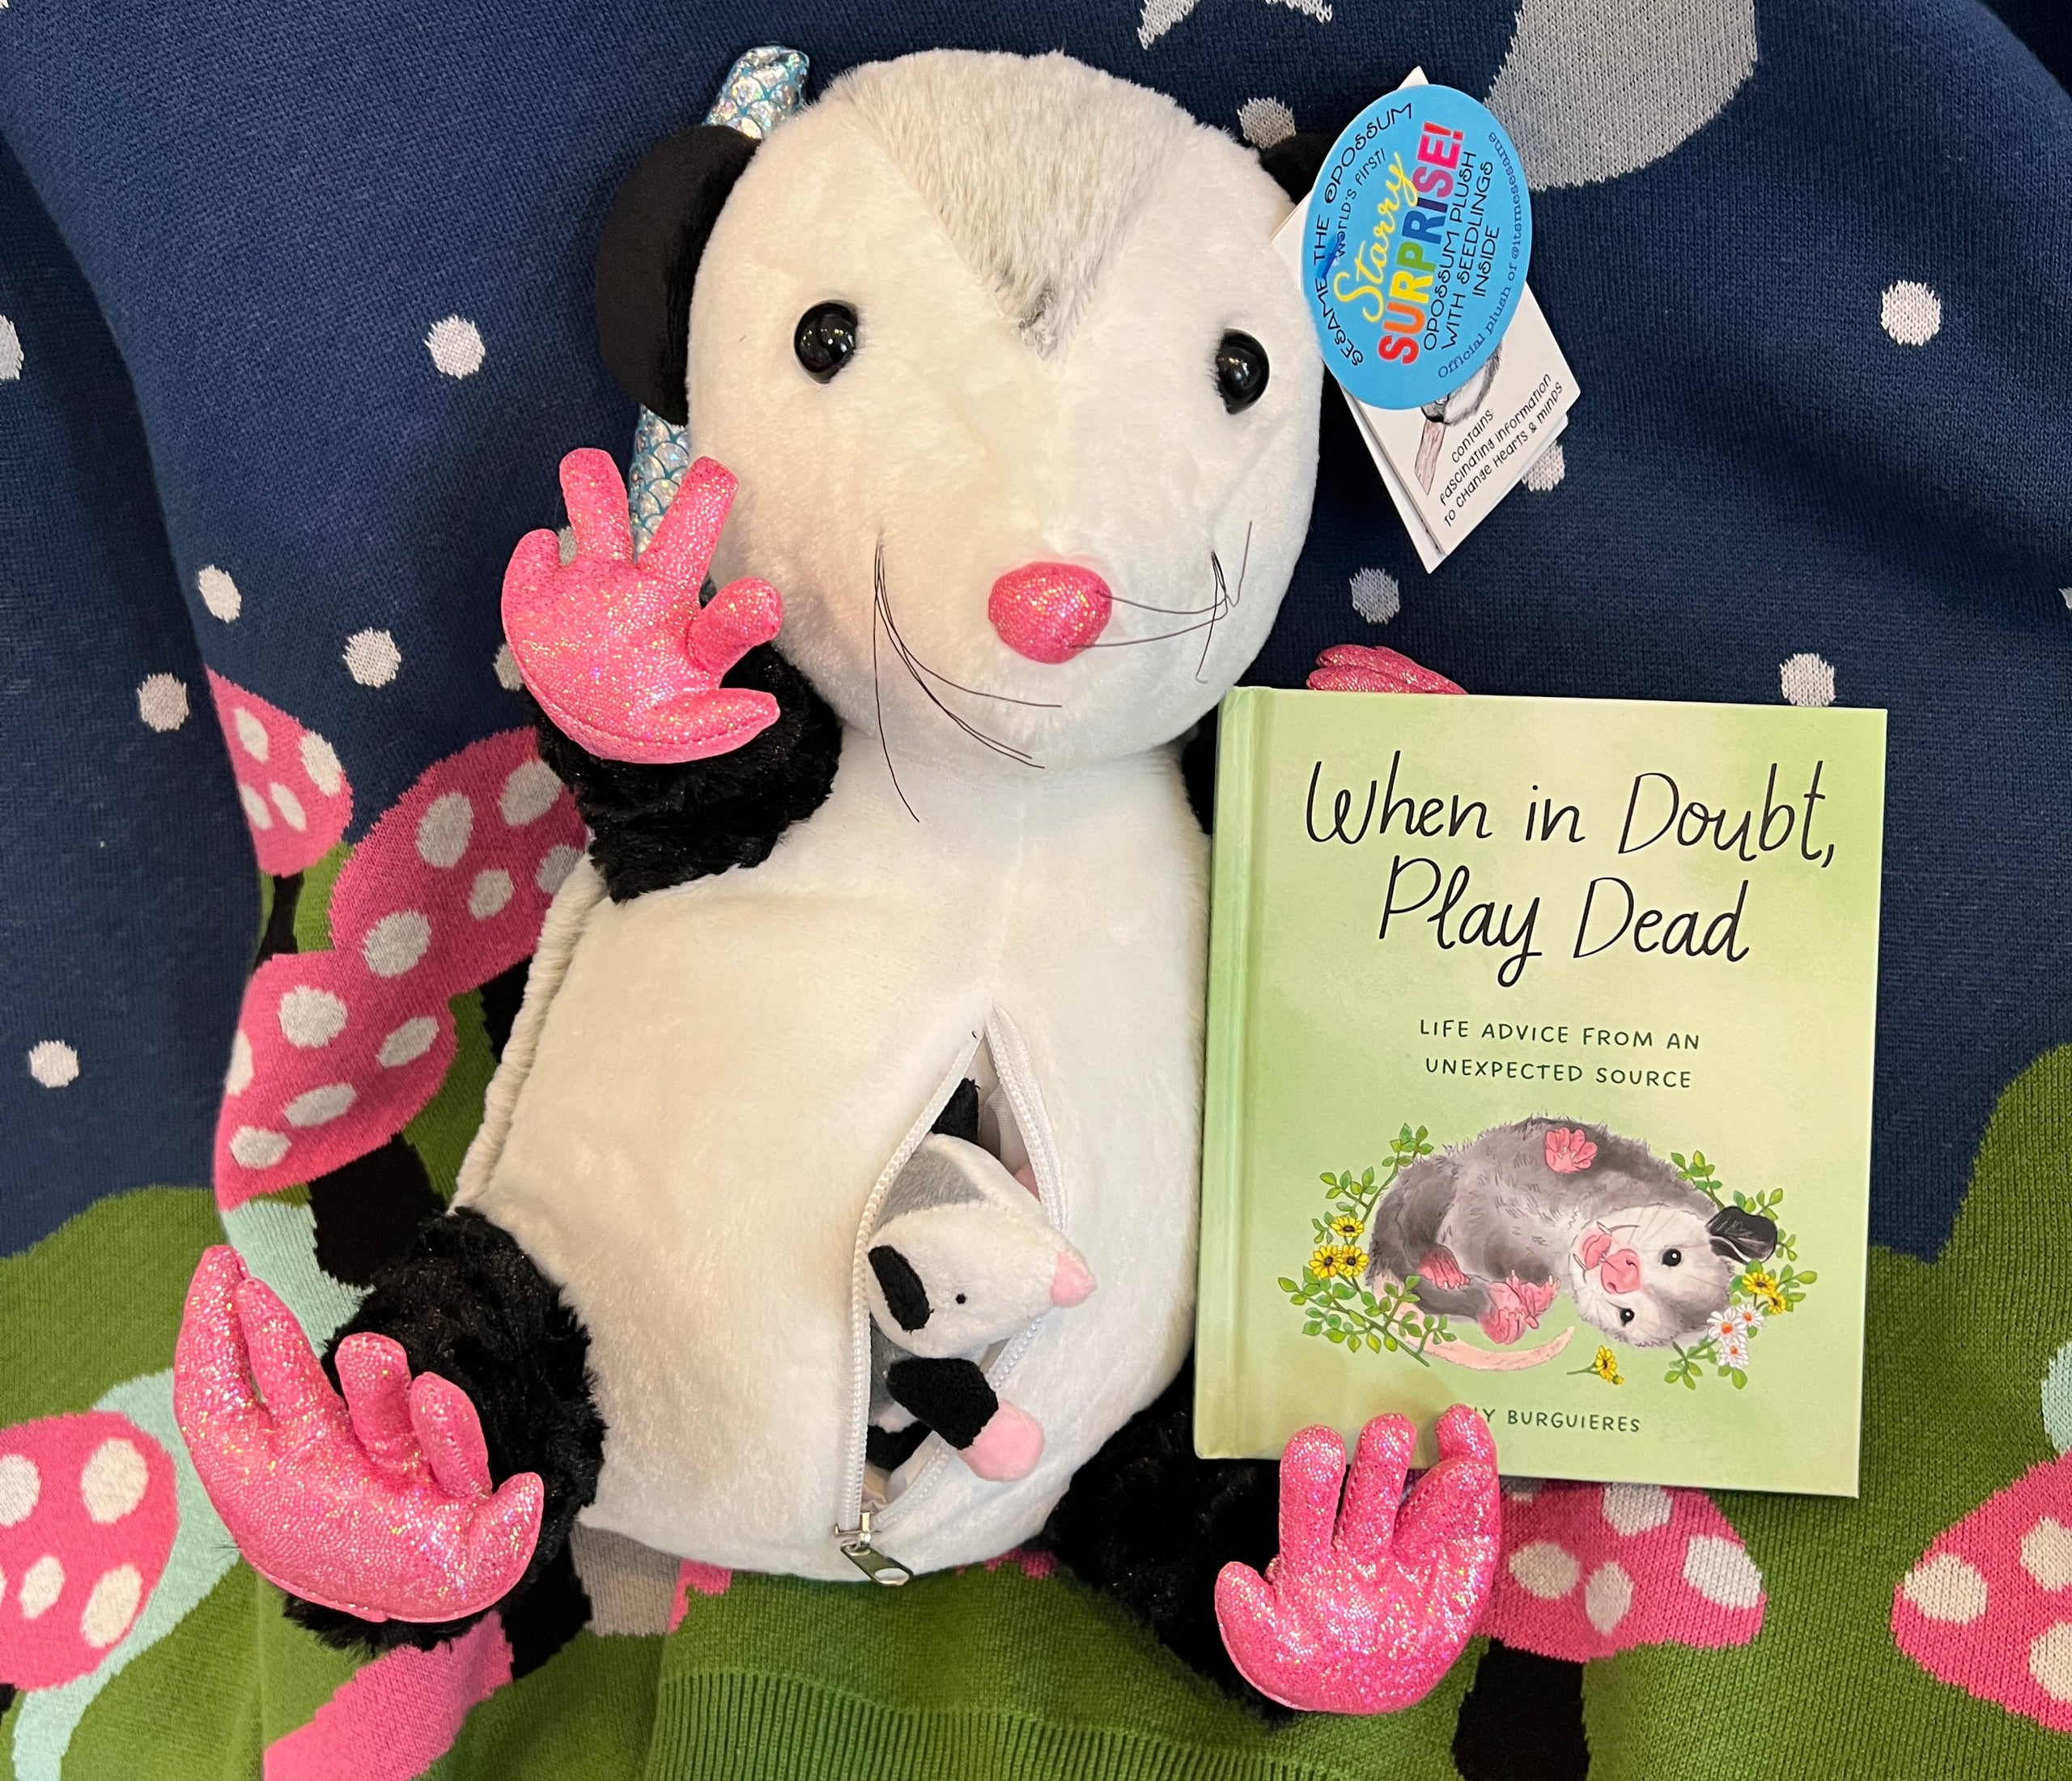 Starry Surprise! Pouched Opossum Plush with Babies